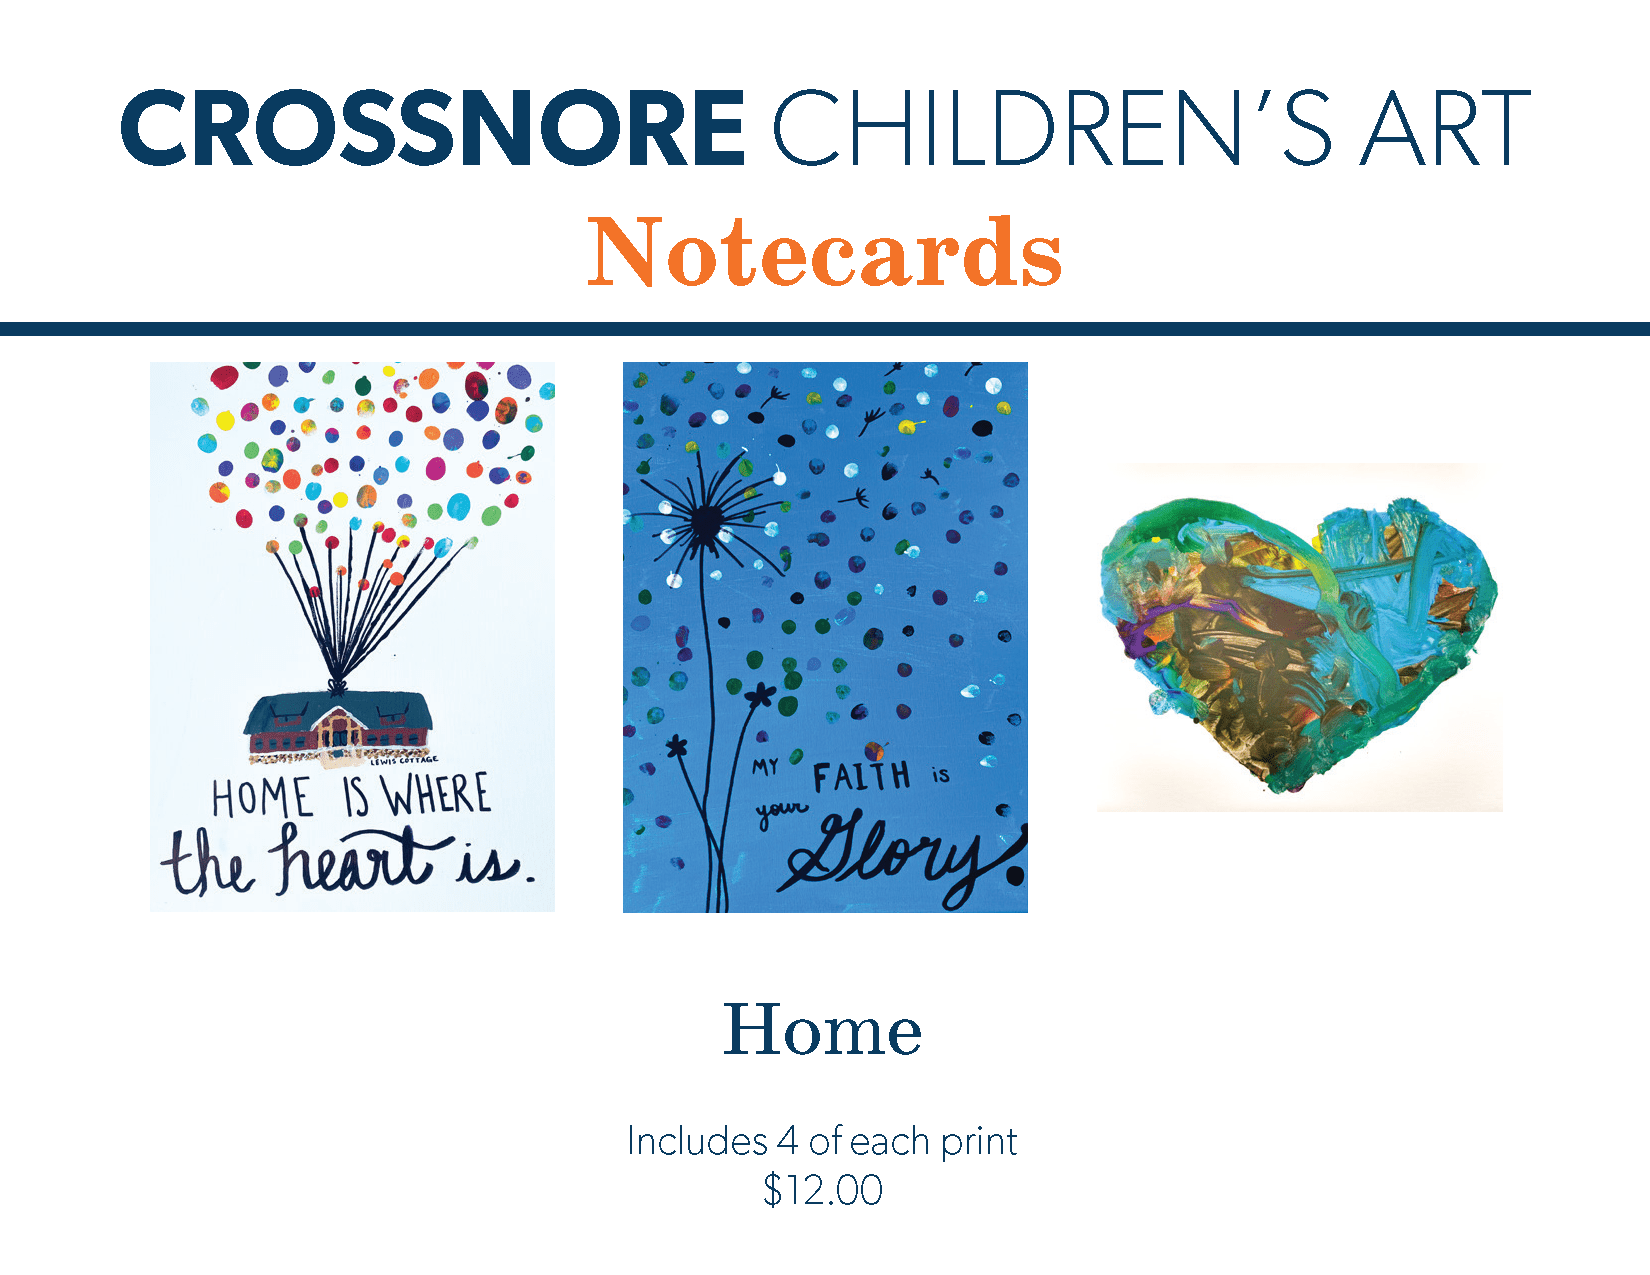 face card for crossnore children's art notecards